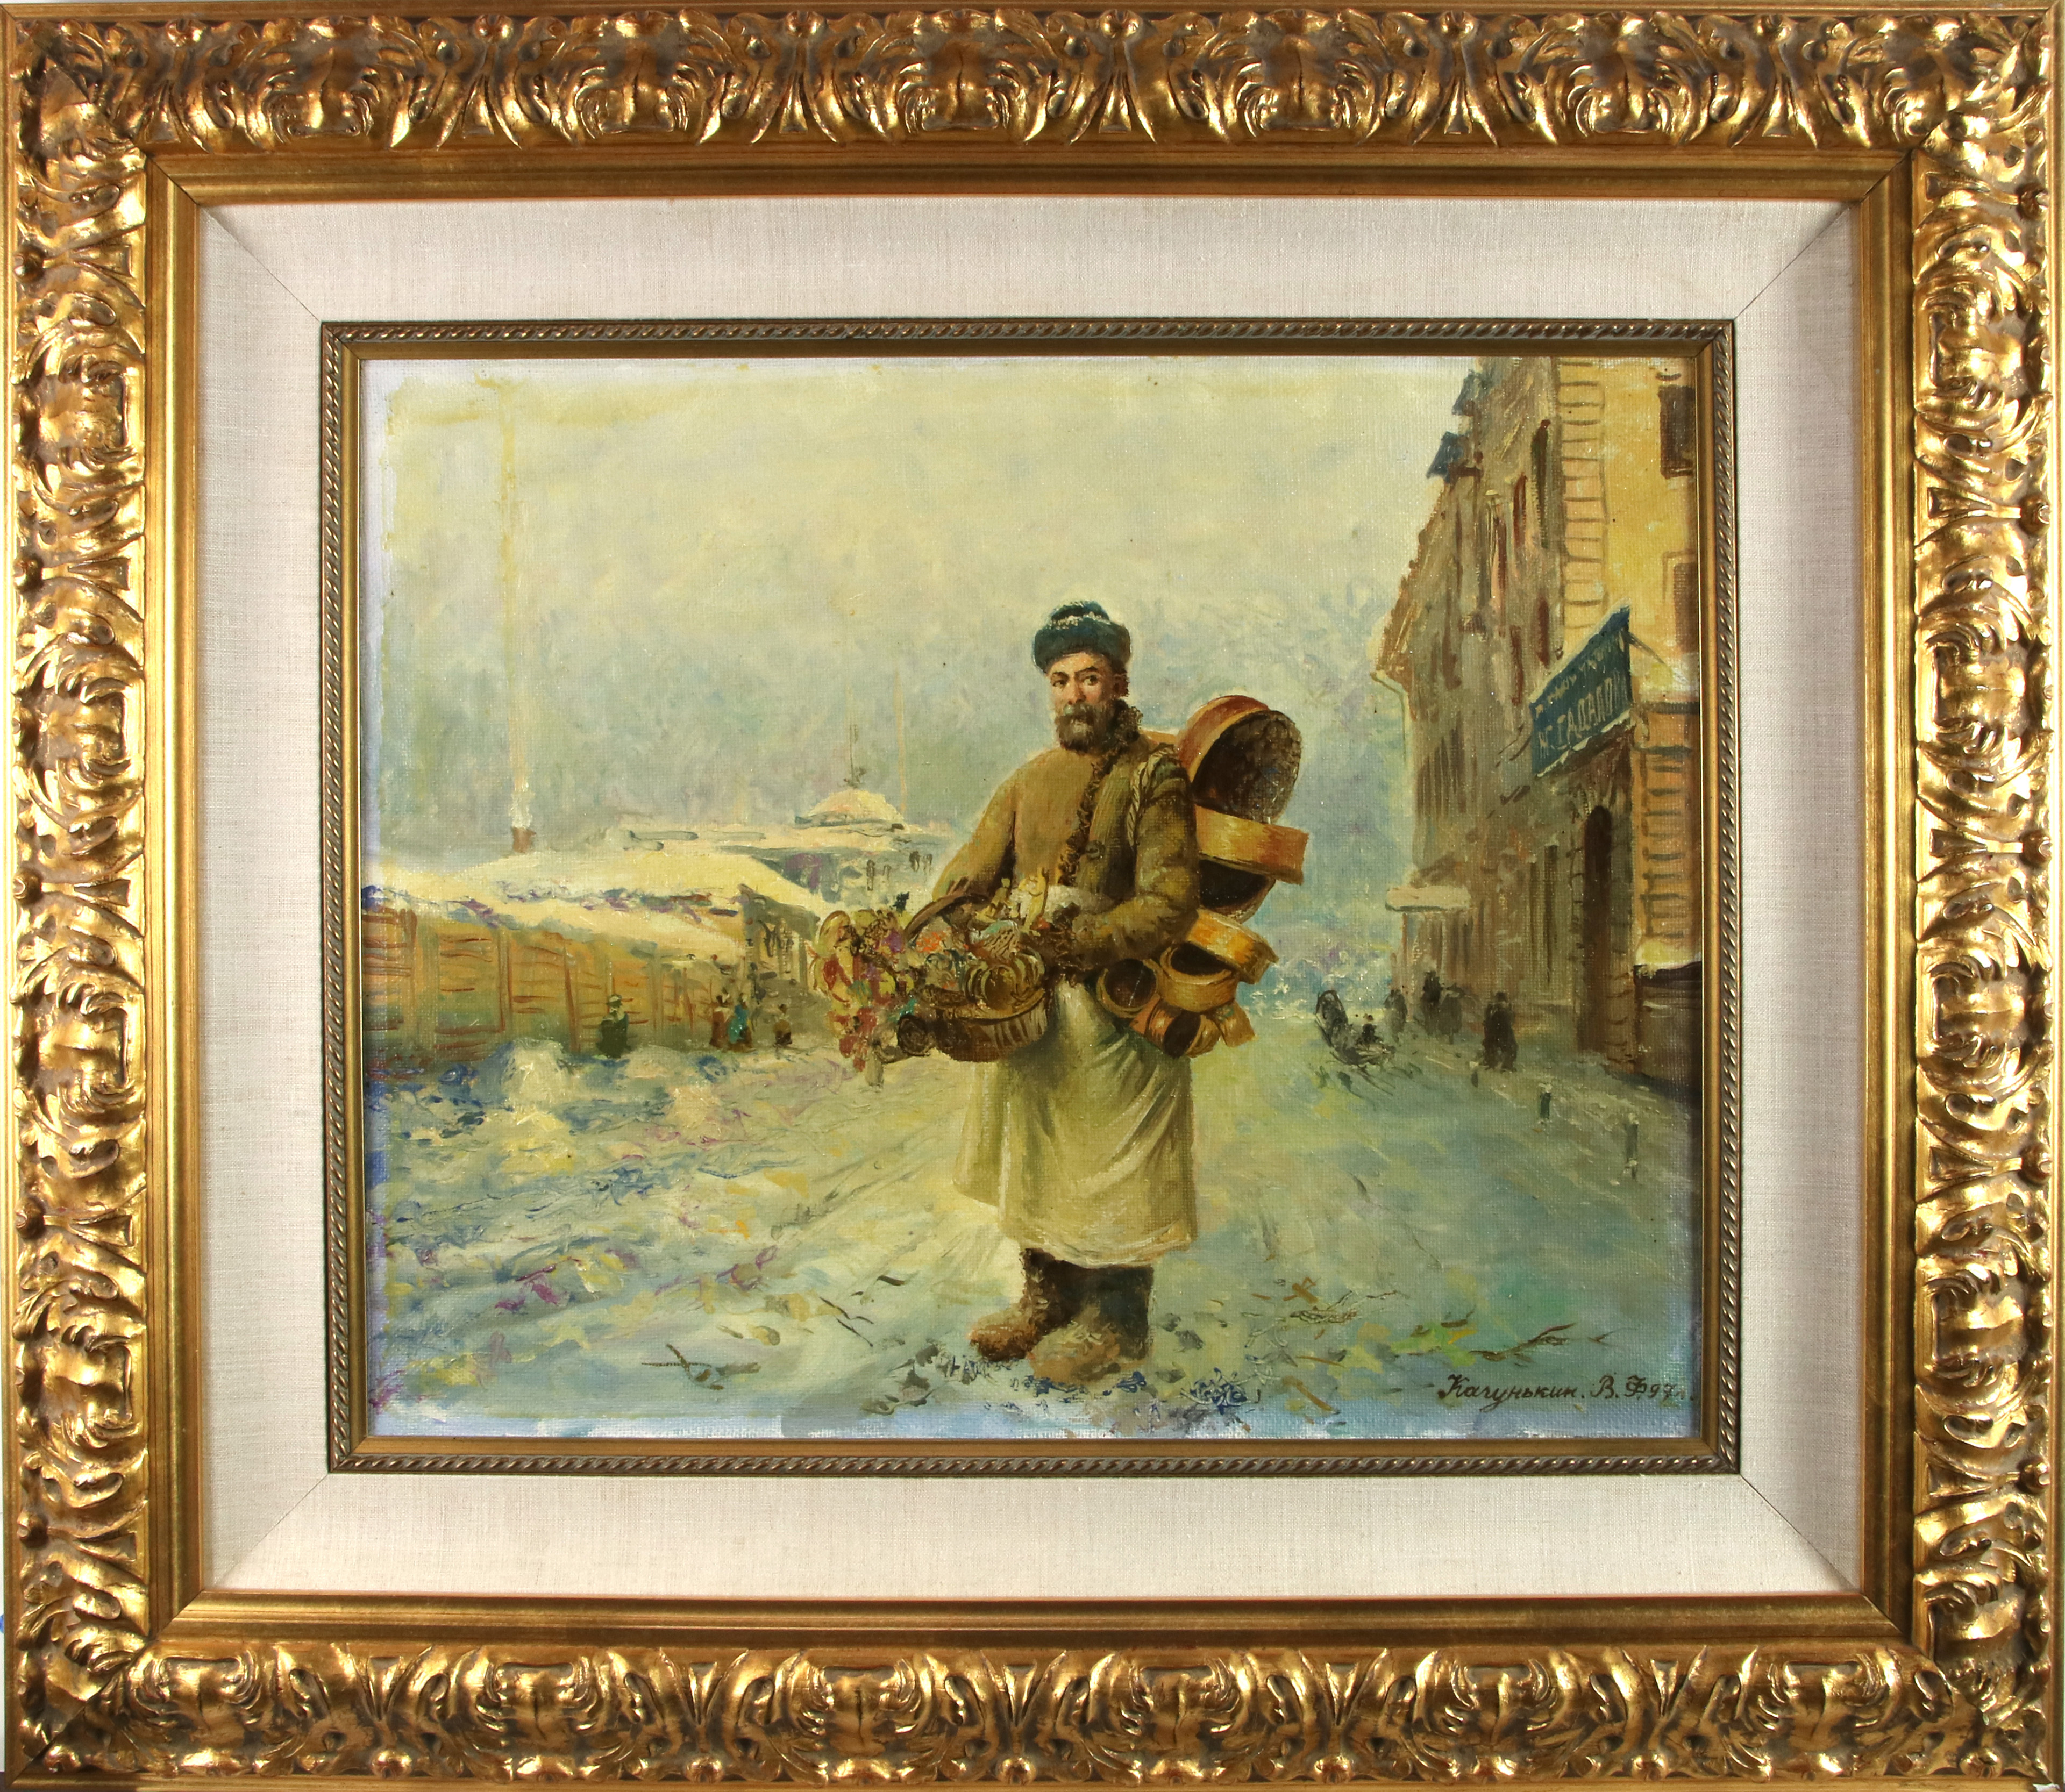 PAINTING, MERCHANT IN THE SNOW